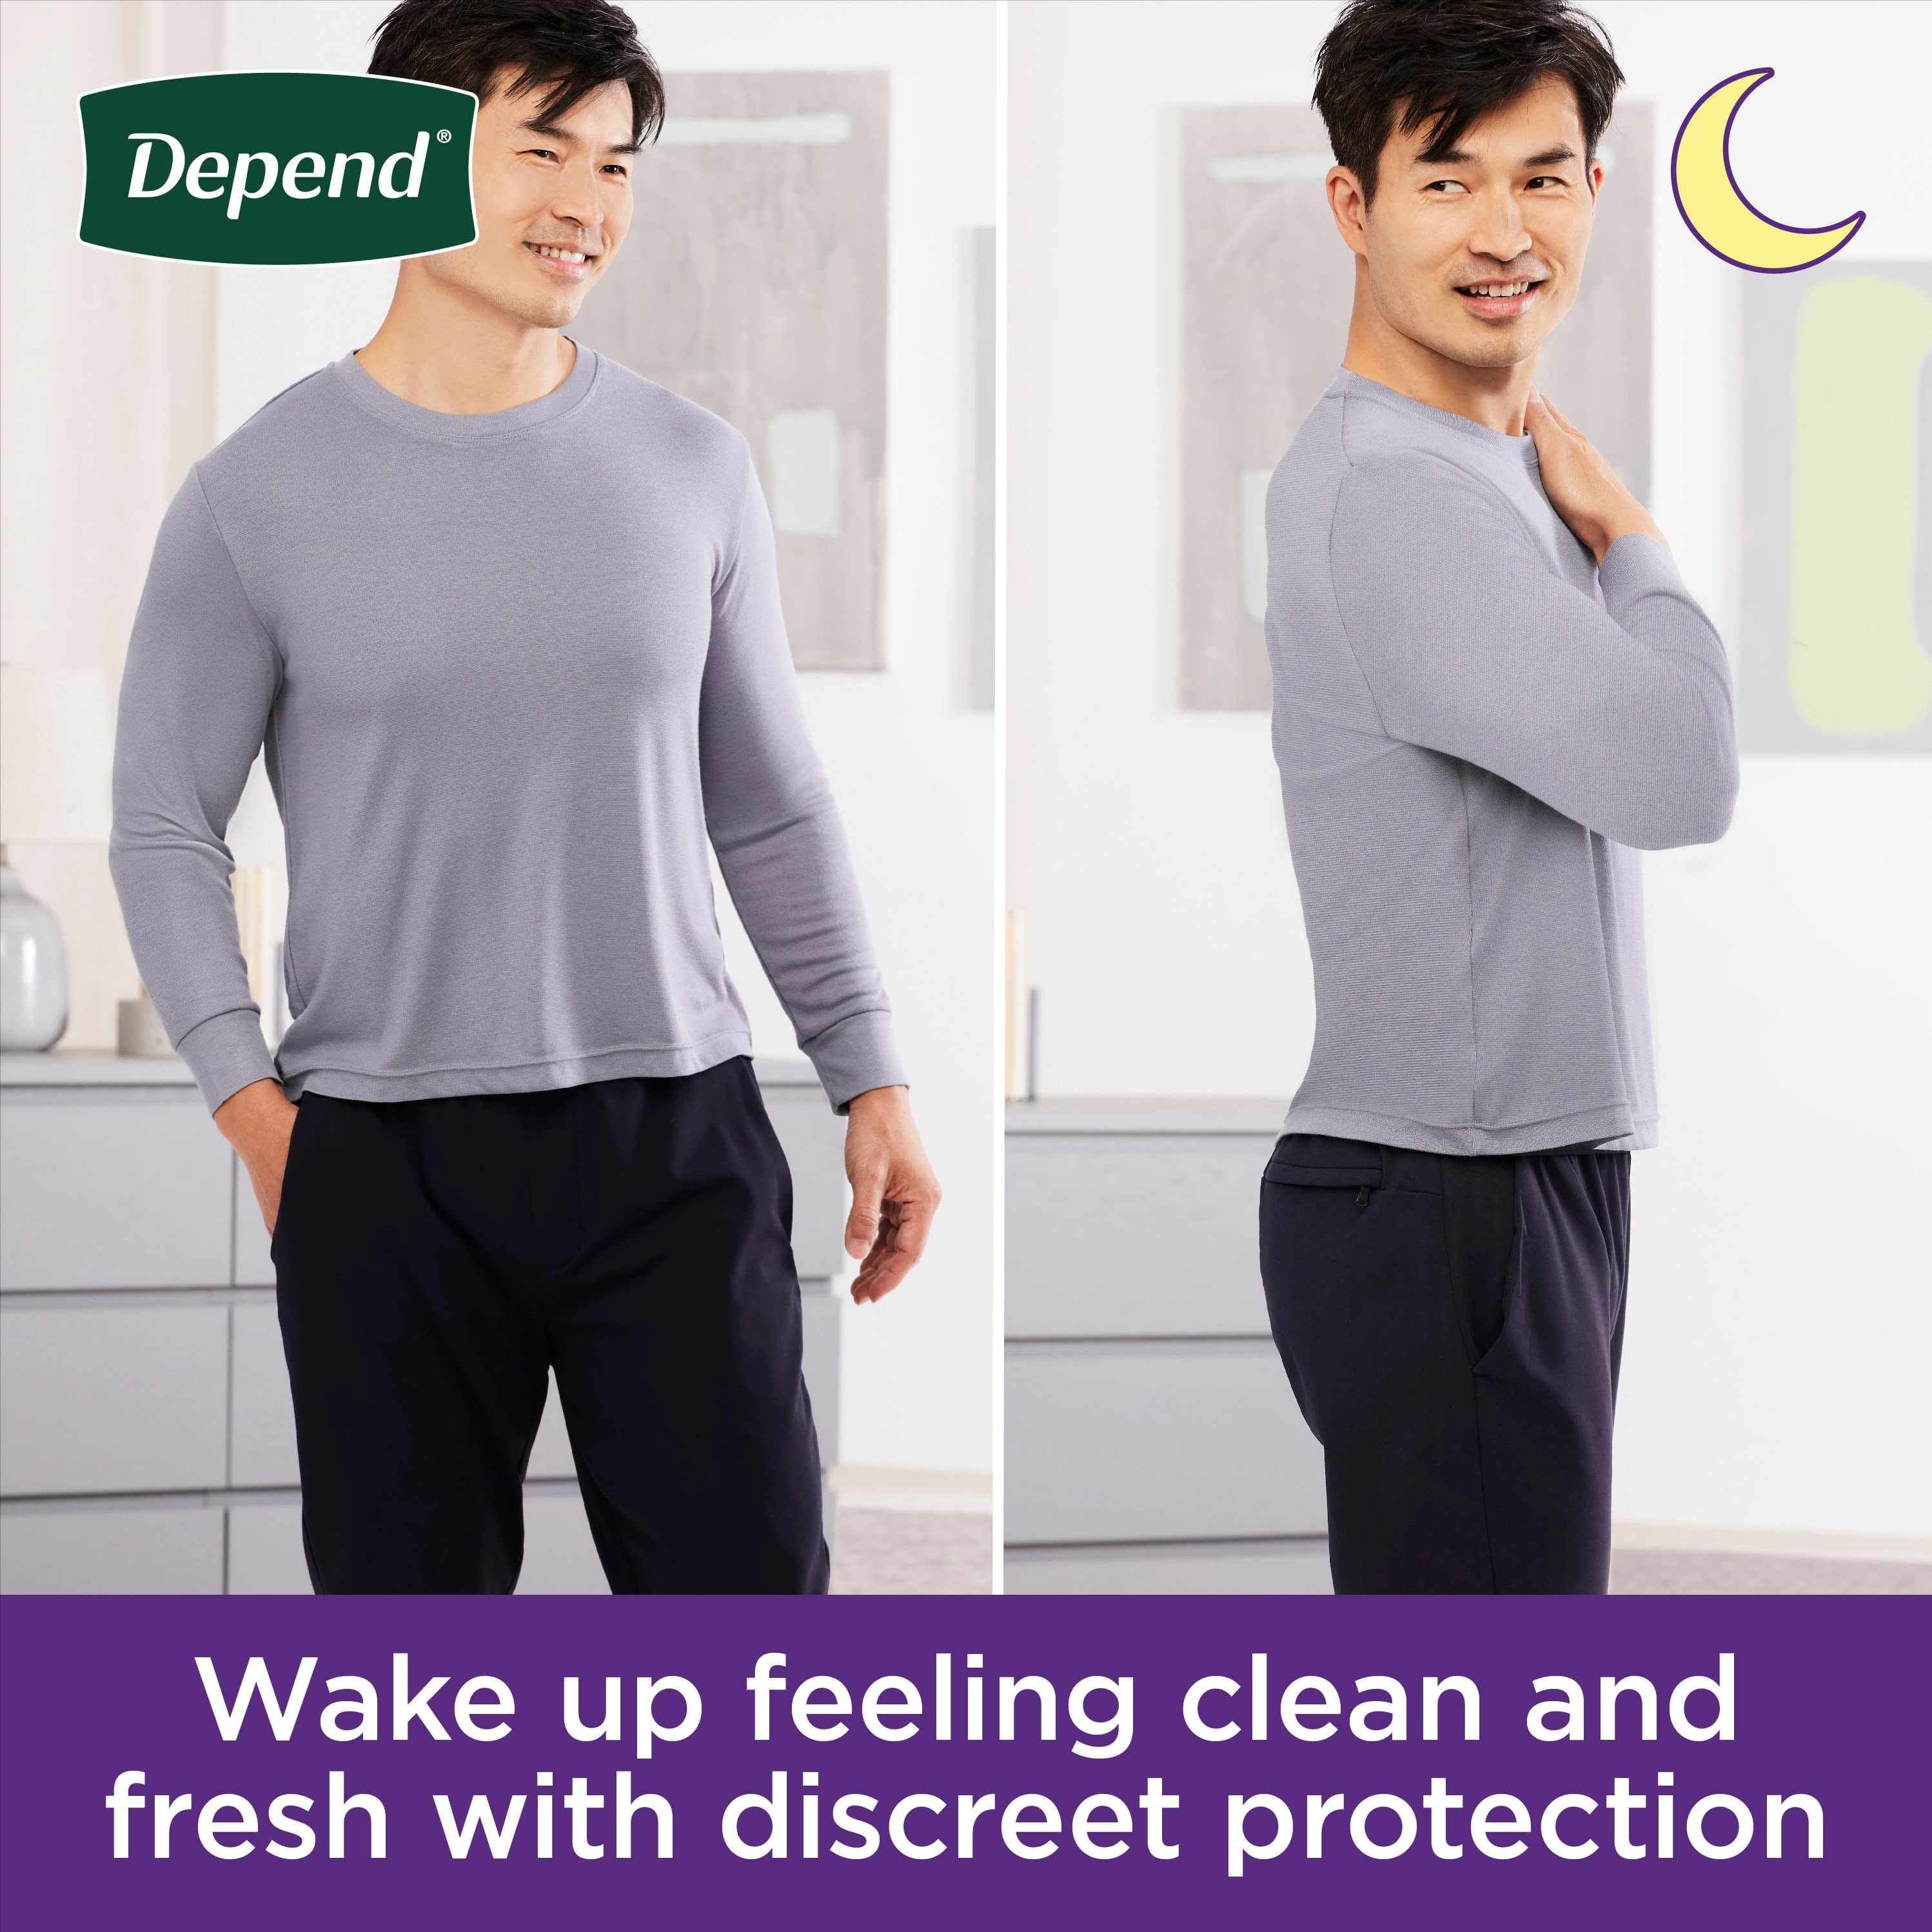 Depend Night Defense Adult Incontinence Underwear for Men, Overnight, XL,  Grey, 12Ct 